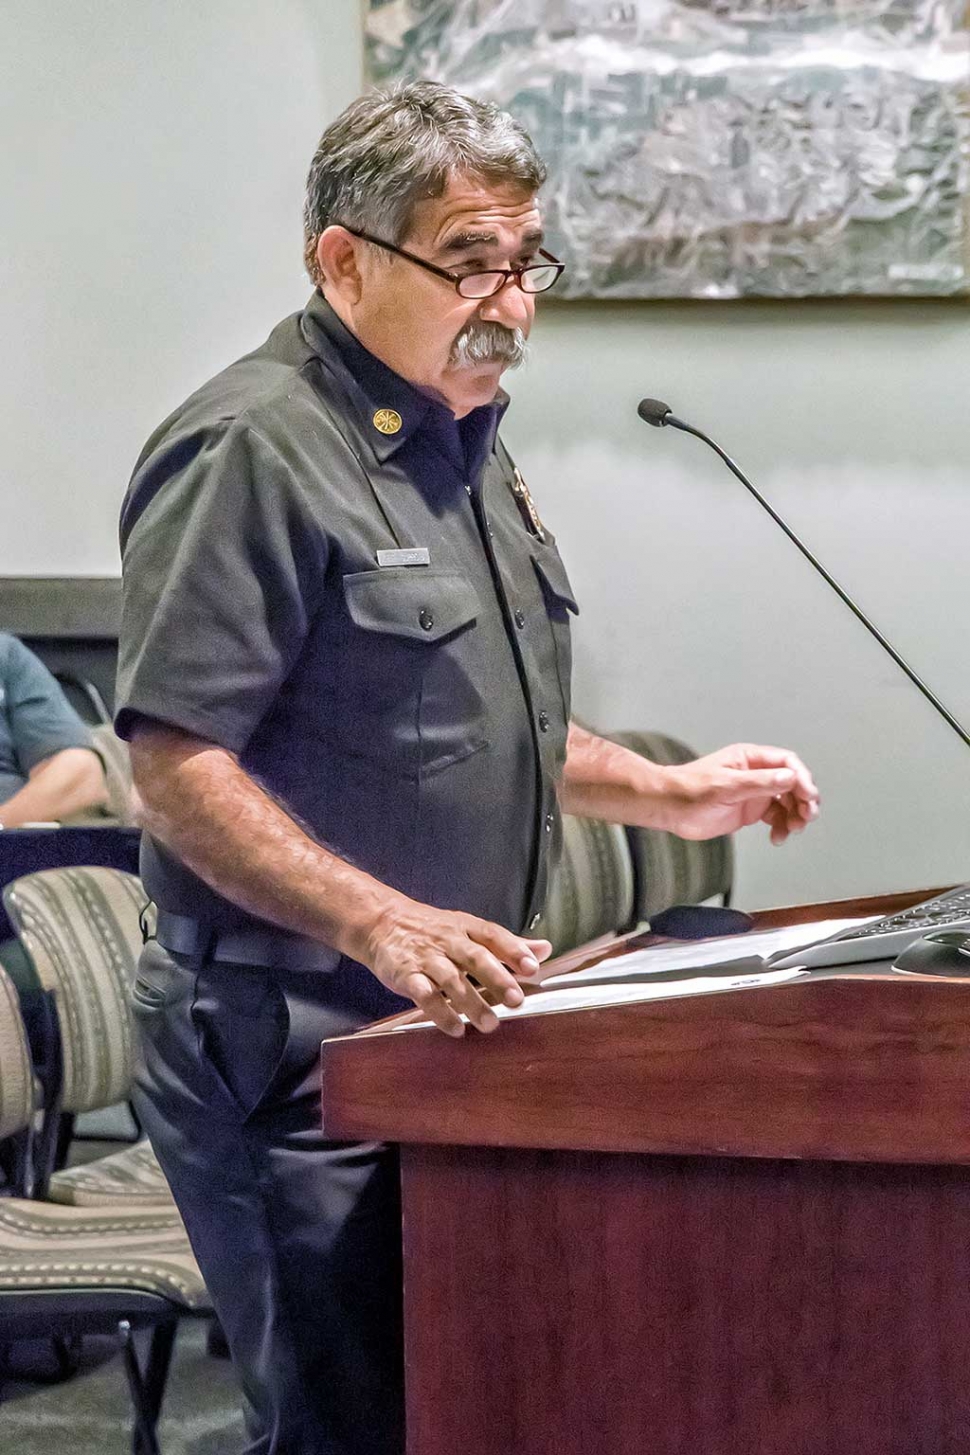 Fillmore Fire Chief Keith Gurrola spoke at the May 10th council meeting on behalf of the acceptance of field inventory of properties requiring weed and rubbish abatement, instruction to the Fire Chief to notify those property owners, and adoption of the City Council resolution NO. 16-3530 declaring said properties to be a public nuisance and setting a public hearing for abatement on June 14, 2016. Gurrola acknowledged that weeds and rubbish can cause a nuisance, but more importantly a fire hazard. He brought forth the possible issues of who was on the list, but assured the Council that any misunderstandings would be resolved promptly. The motion to accept the field inventory was carried. Photo by Bob Crum.